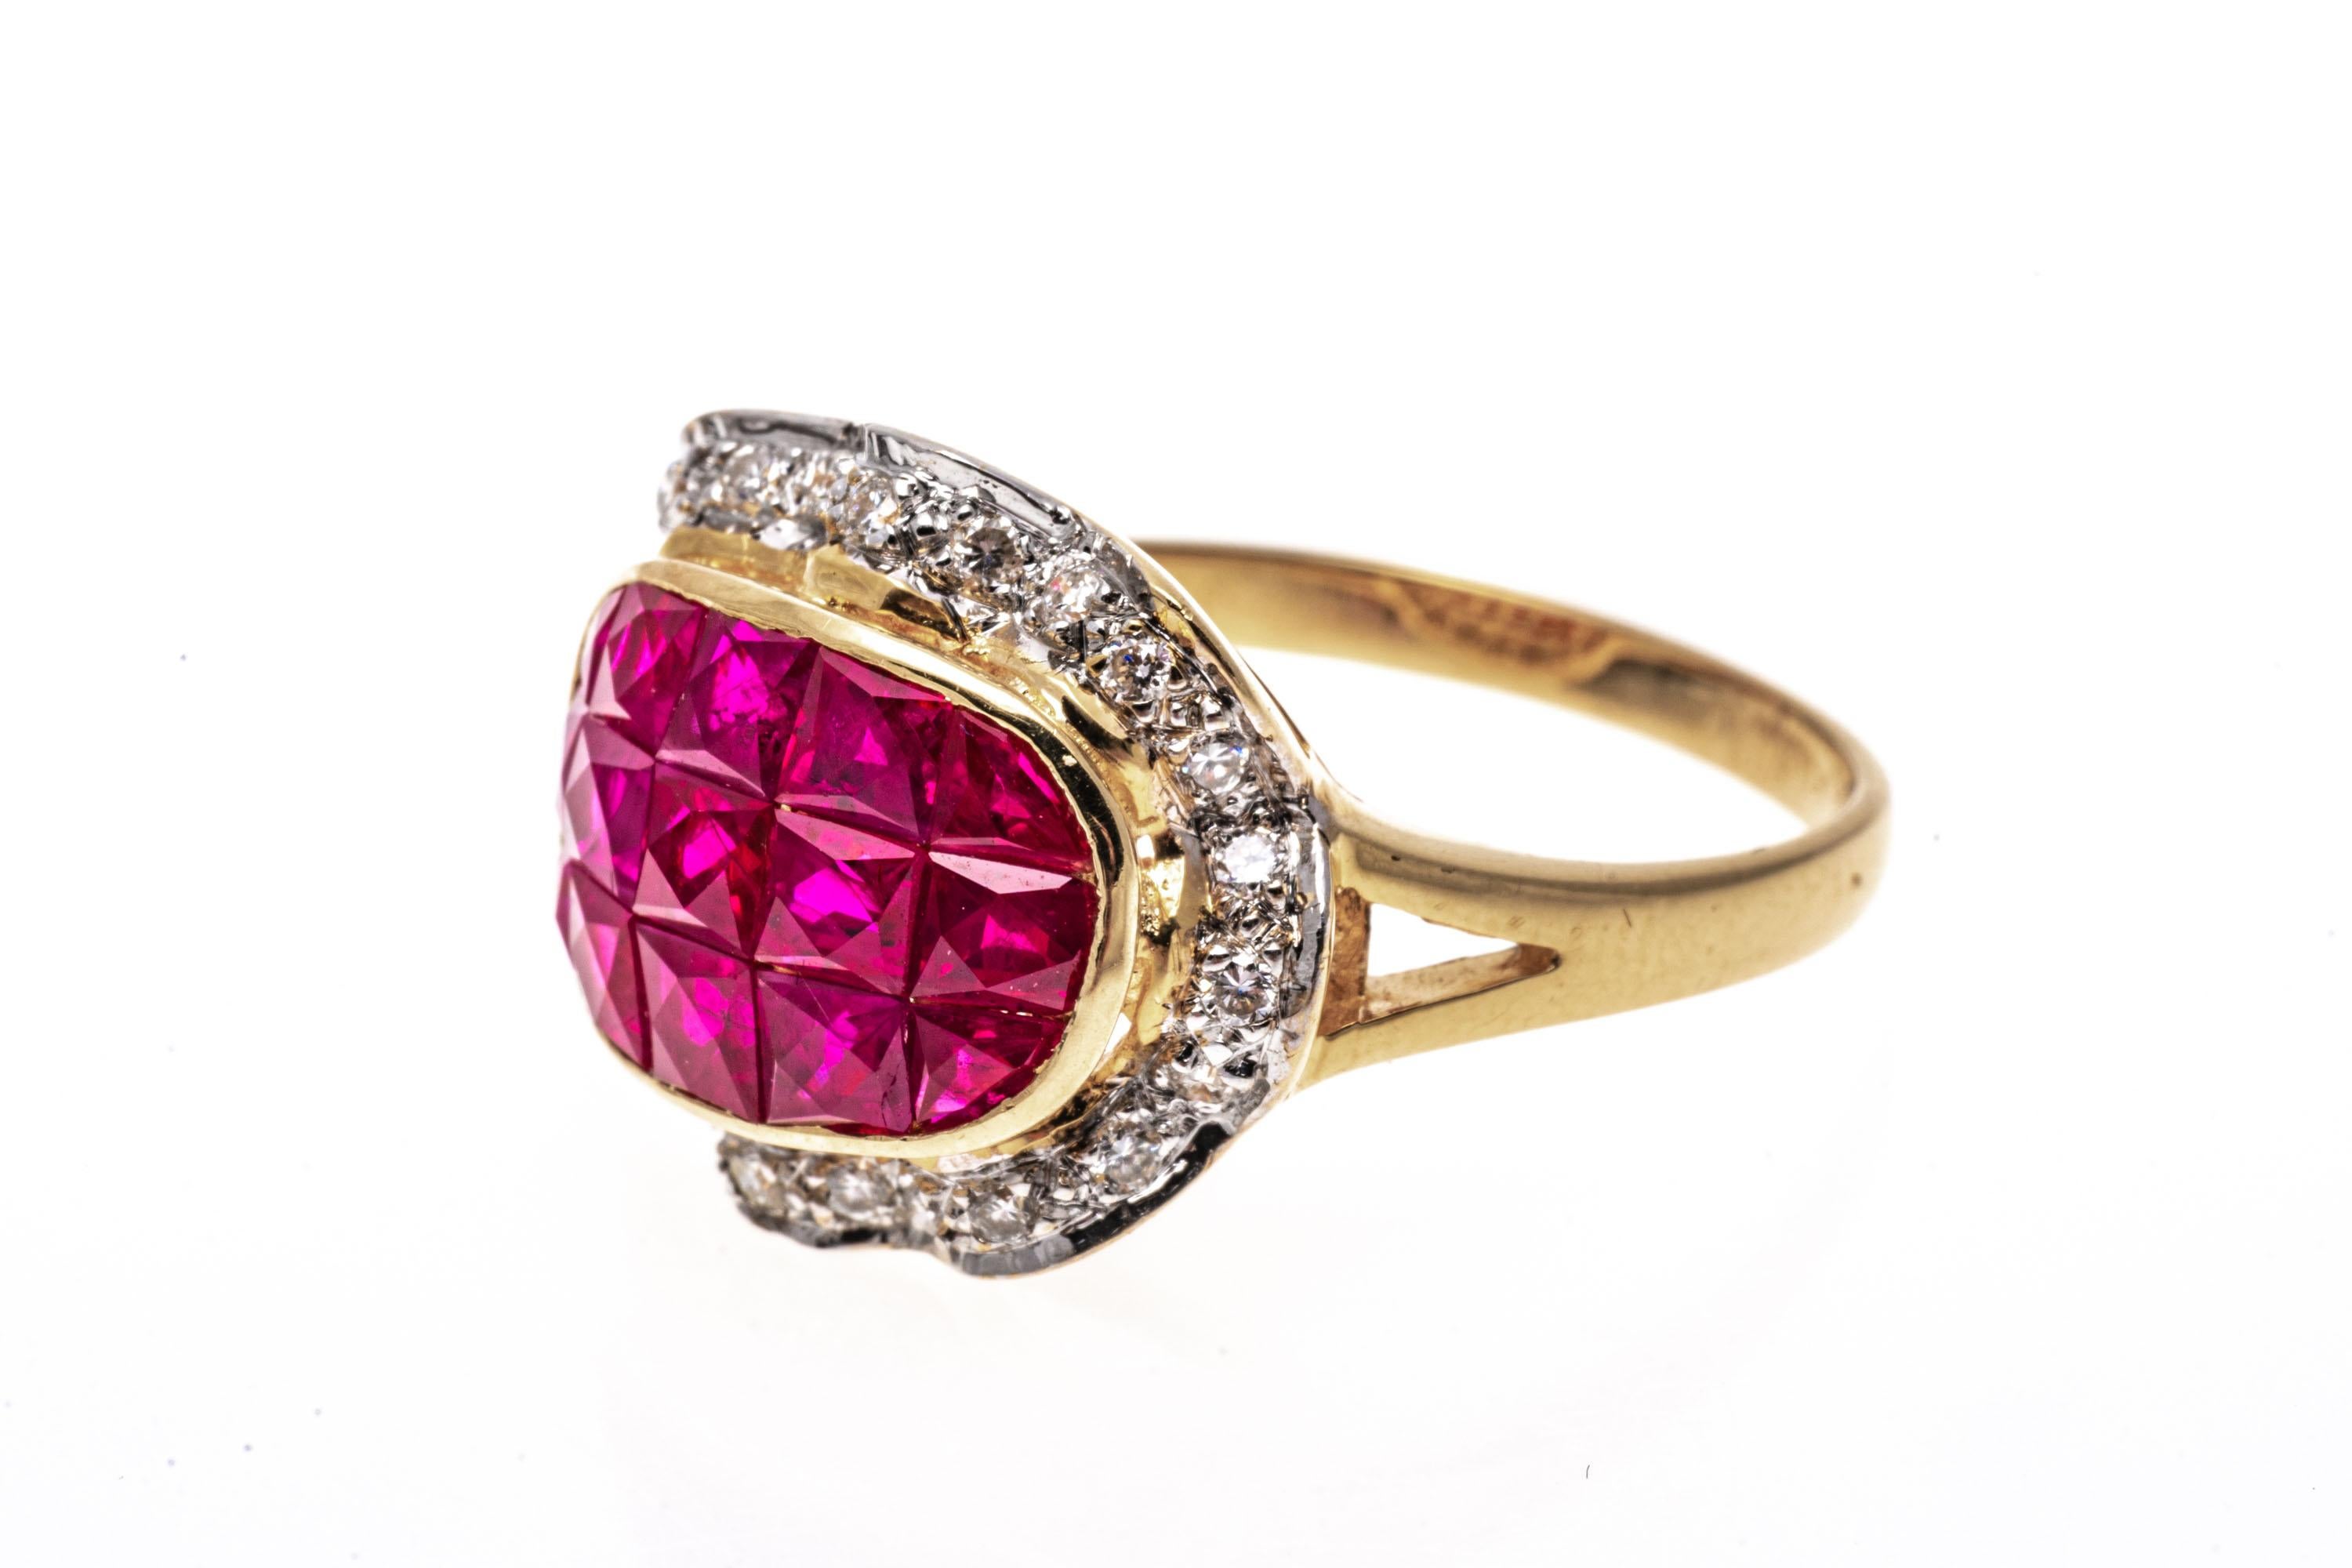 Women's 18k Yellow Gold Calibre Cut Ruby Ring With Ruffled Diamond Border, Size 7 For Sale